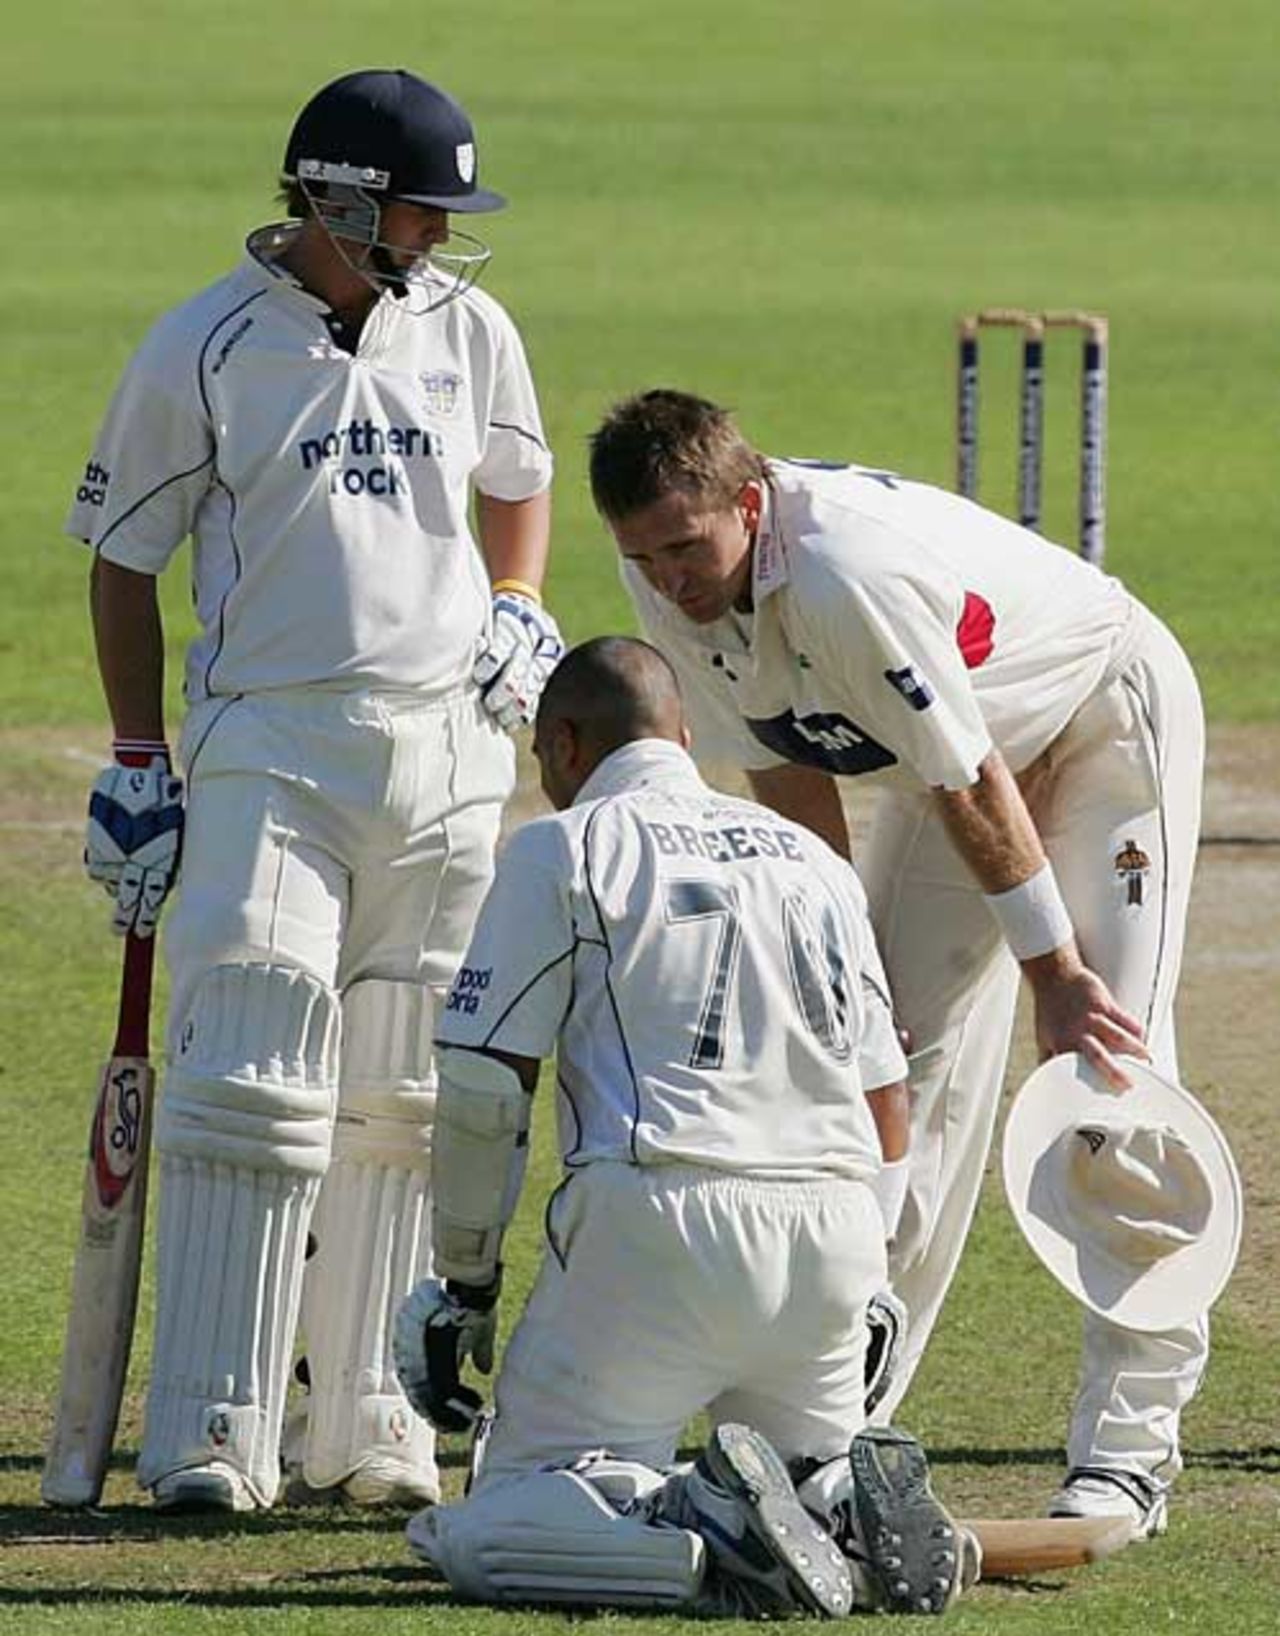 Dominic Cork checks out Gareth Breese after he's hit by a bouncer, Lancashire v Durham, County Championship, Old Trafford, September 15, 2006